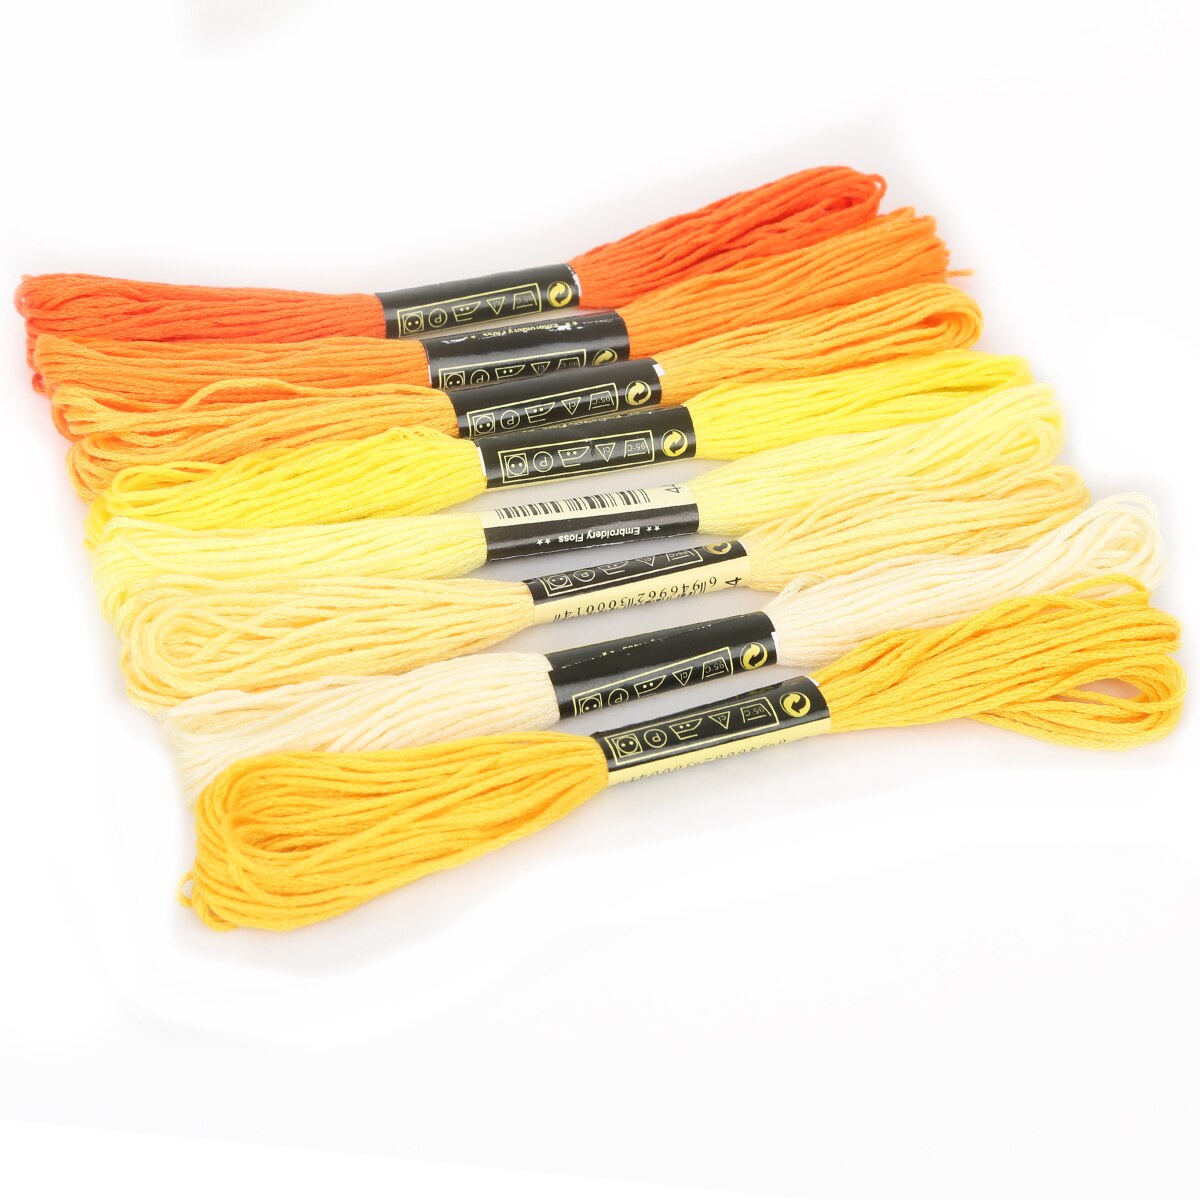 8pcs / bag per small bar 7.5m and Color cross stitch thread DIY clothing sewing supplies and fabrics: Yellow